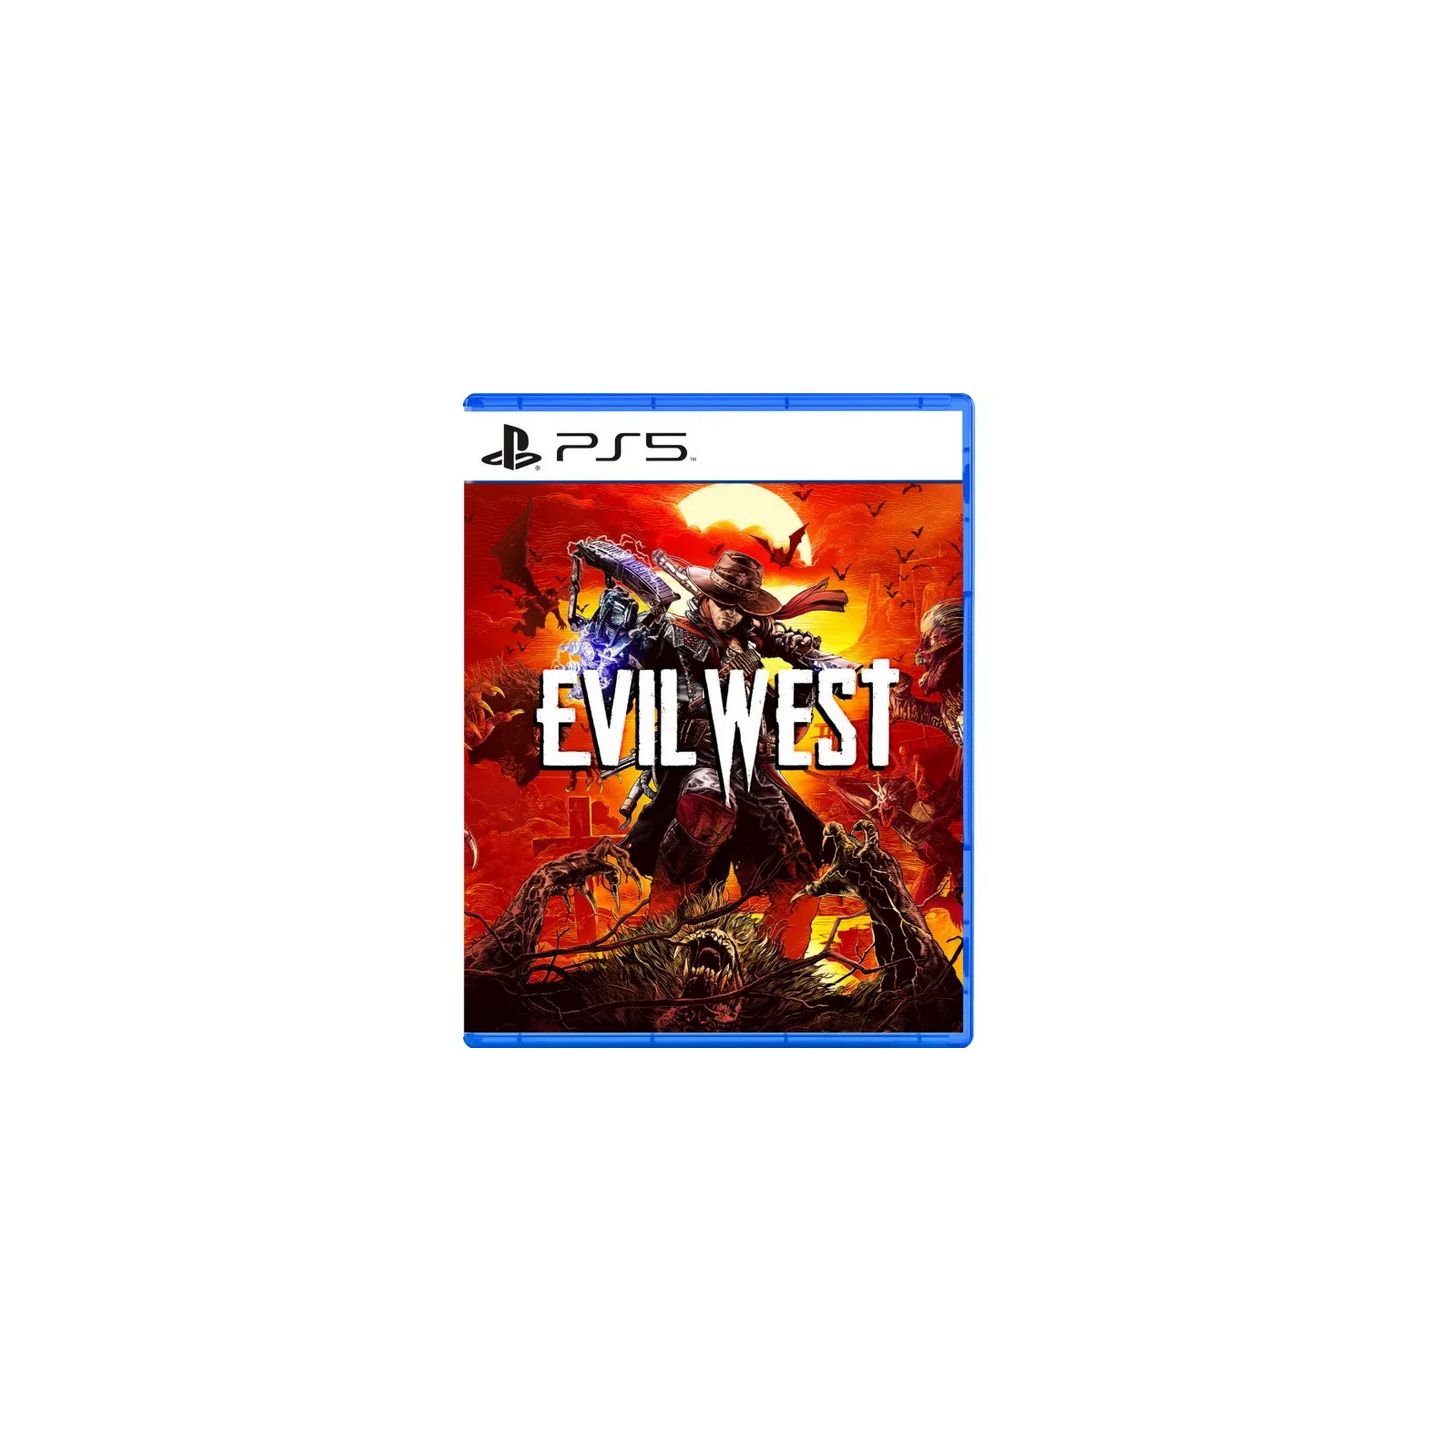 Evil West, Sony Playstation 5